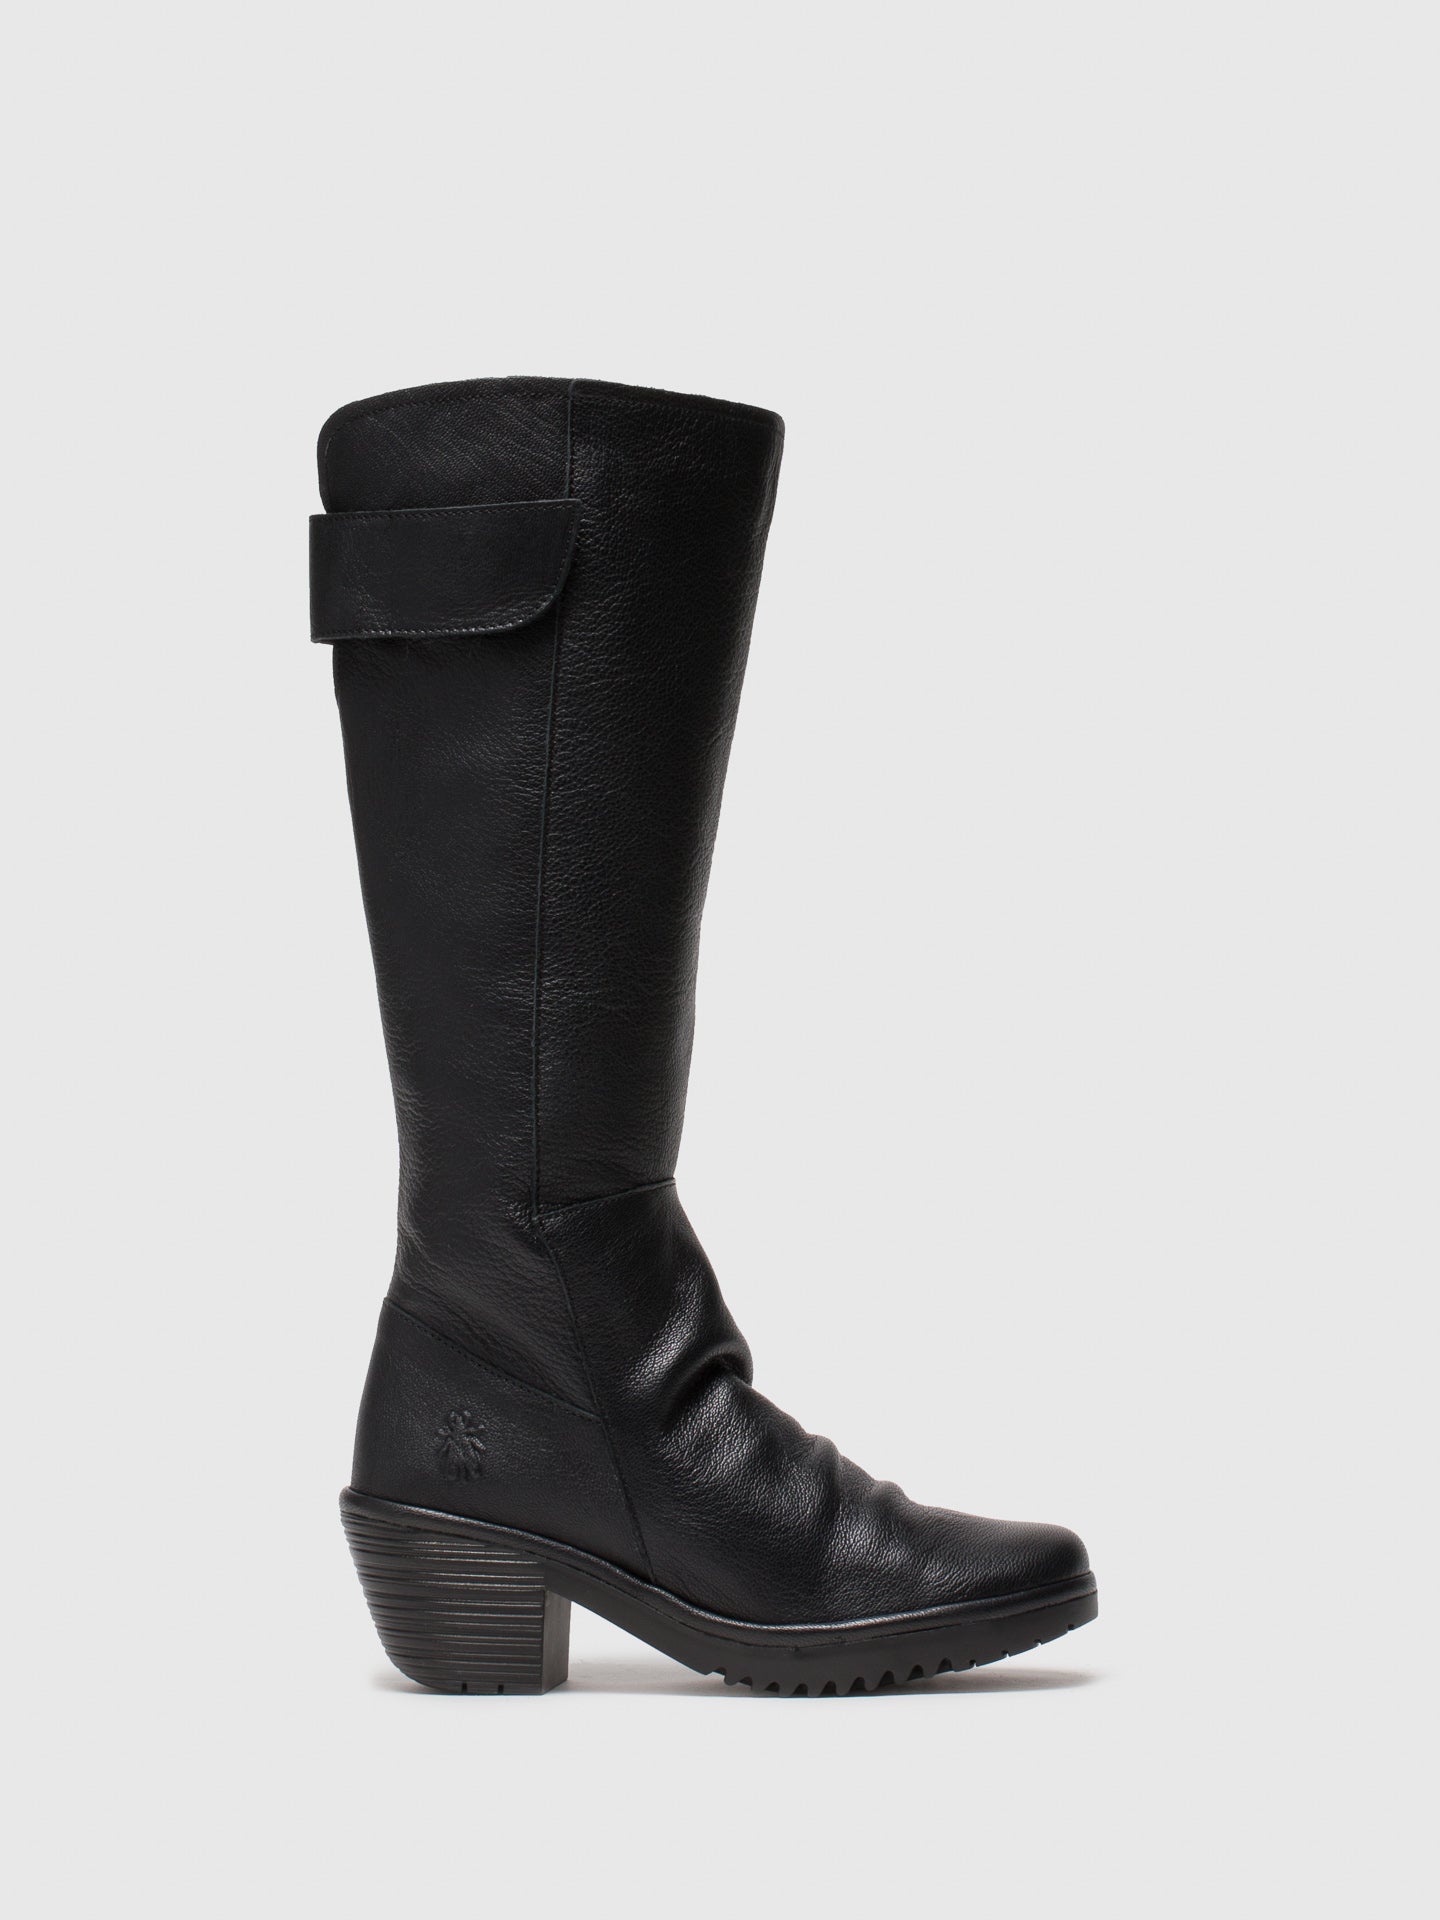 Fly London Black Zip Up Boots